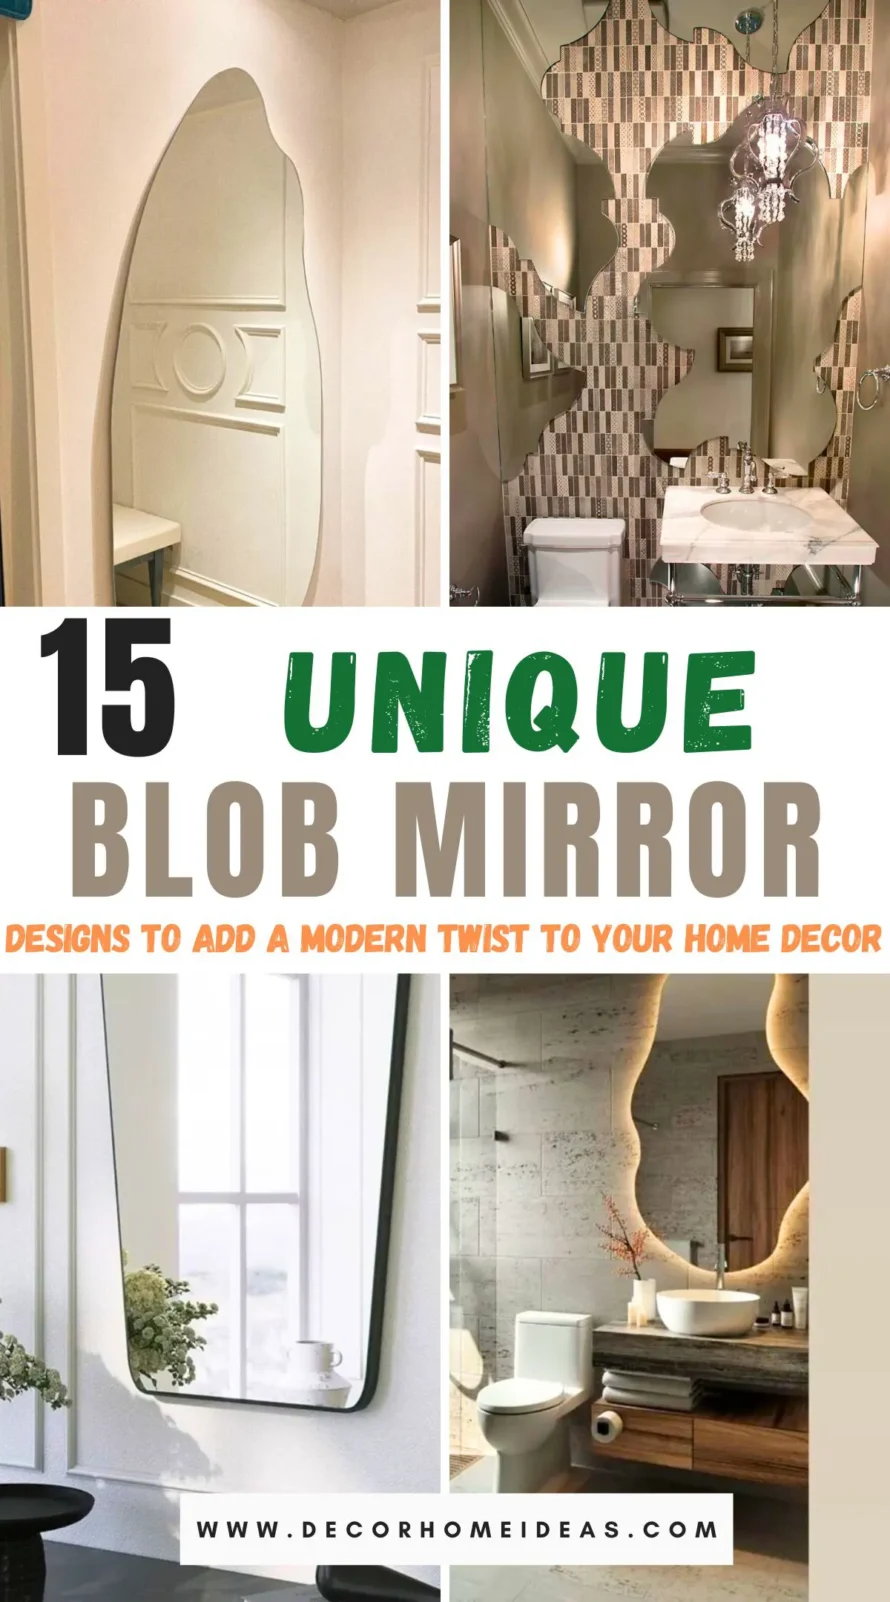 Discover 15 unique blob mirror designs that will transform your home decor with a modern twist. These unconventional, artistic mirrors add a touch of whimsy and elegance, becoming instant focal points in any room. Explore how these stunning pieces can enhance your space and inspire creativity. Dive in to find your perfect match and elevate your interior design game!